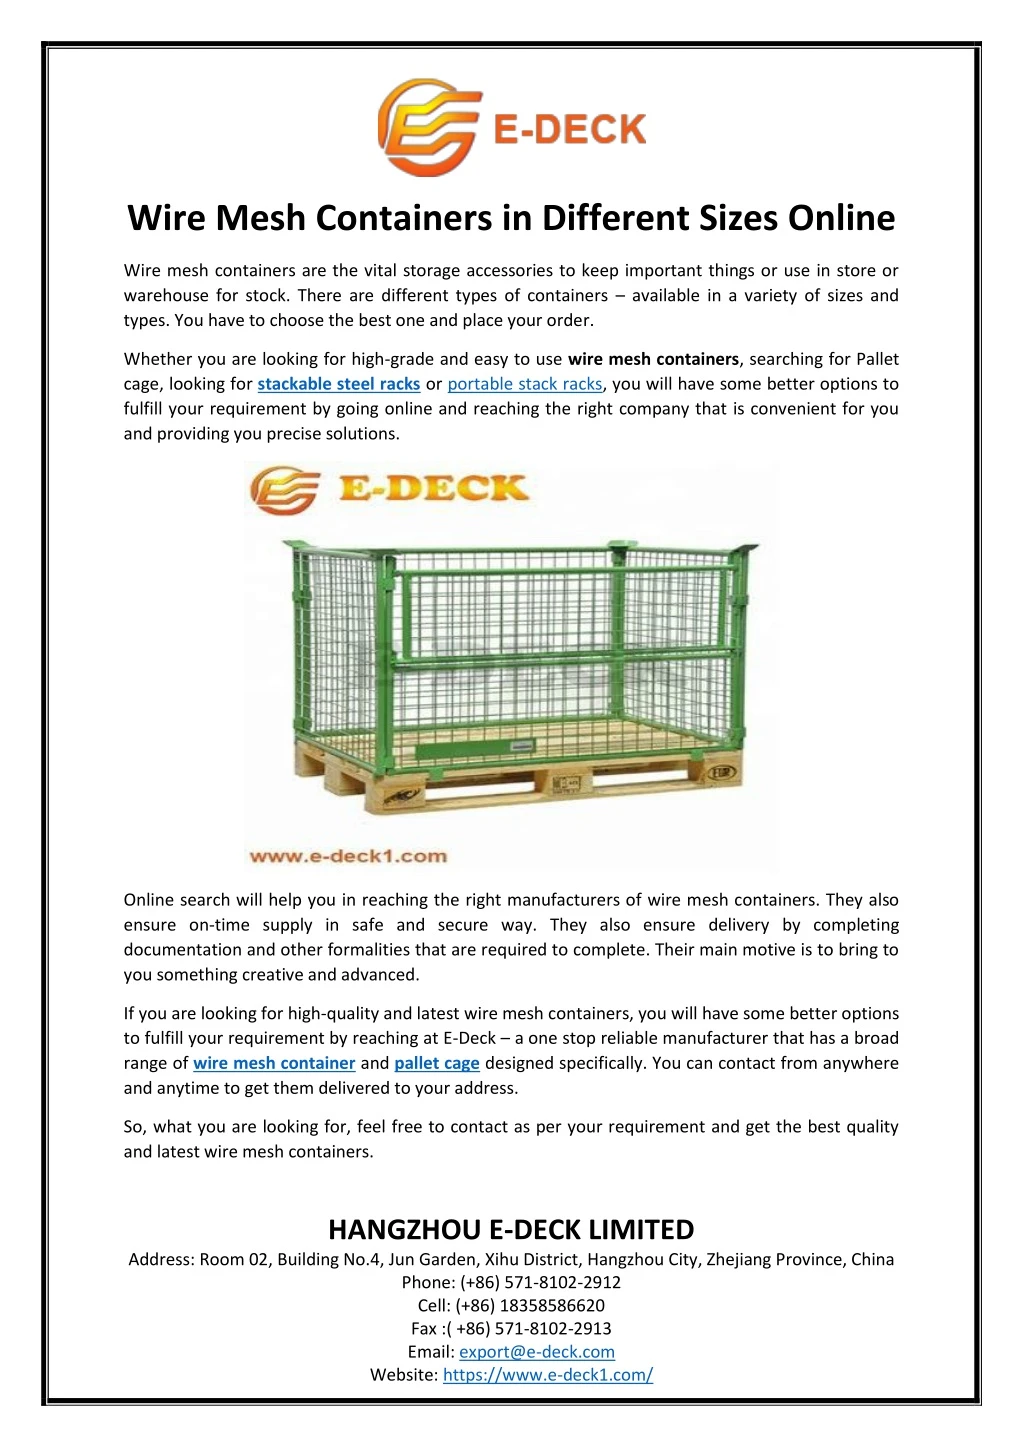 wire mesh containers in different sizes online